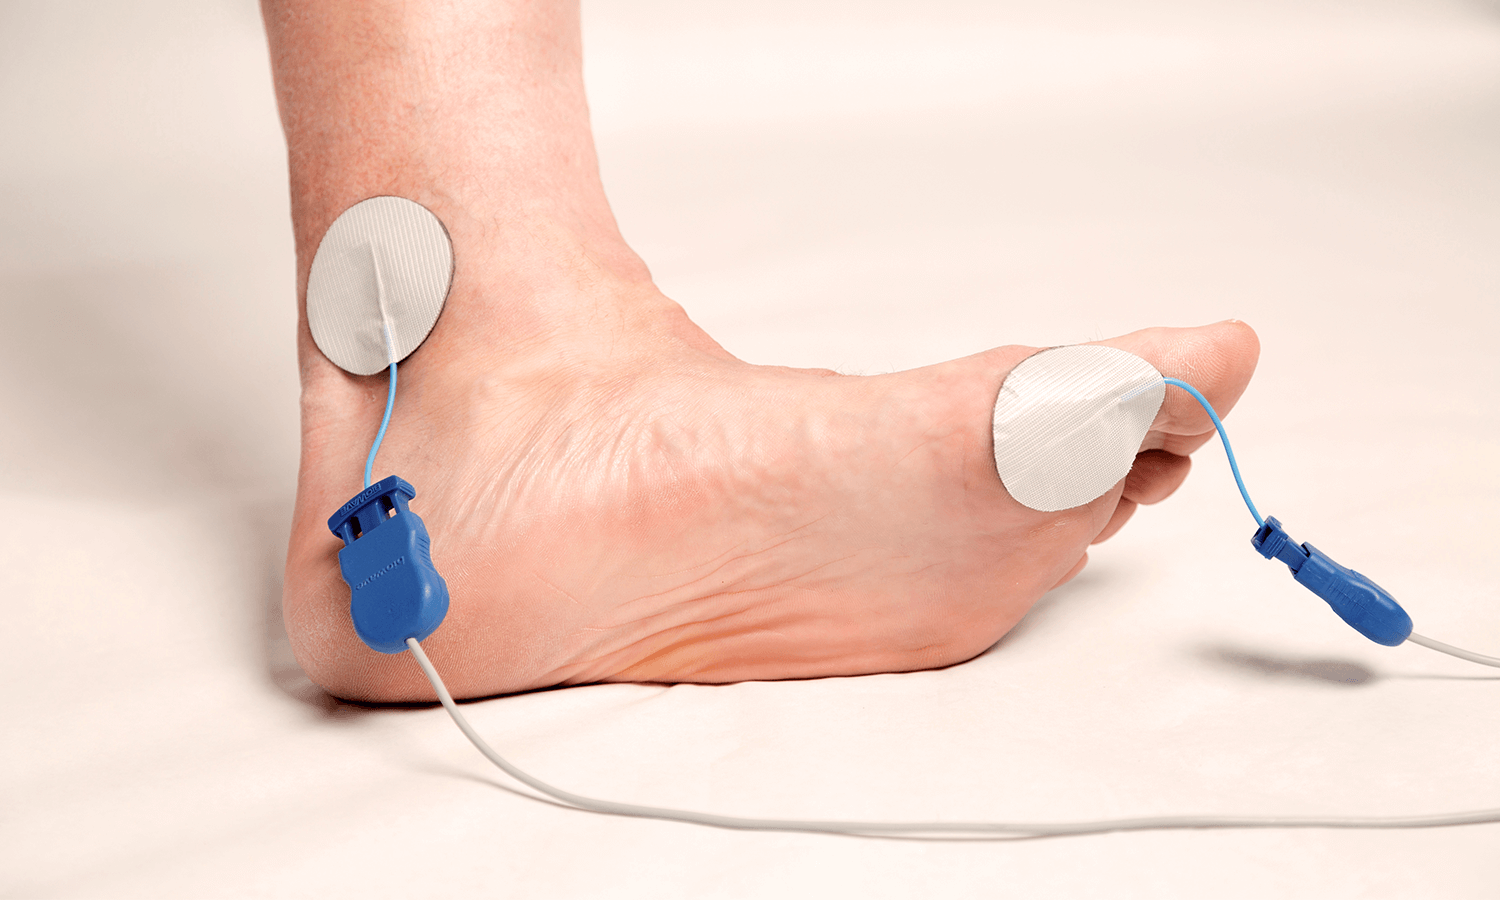 A foot being stimulated by a electrodes to block the transmission of pain